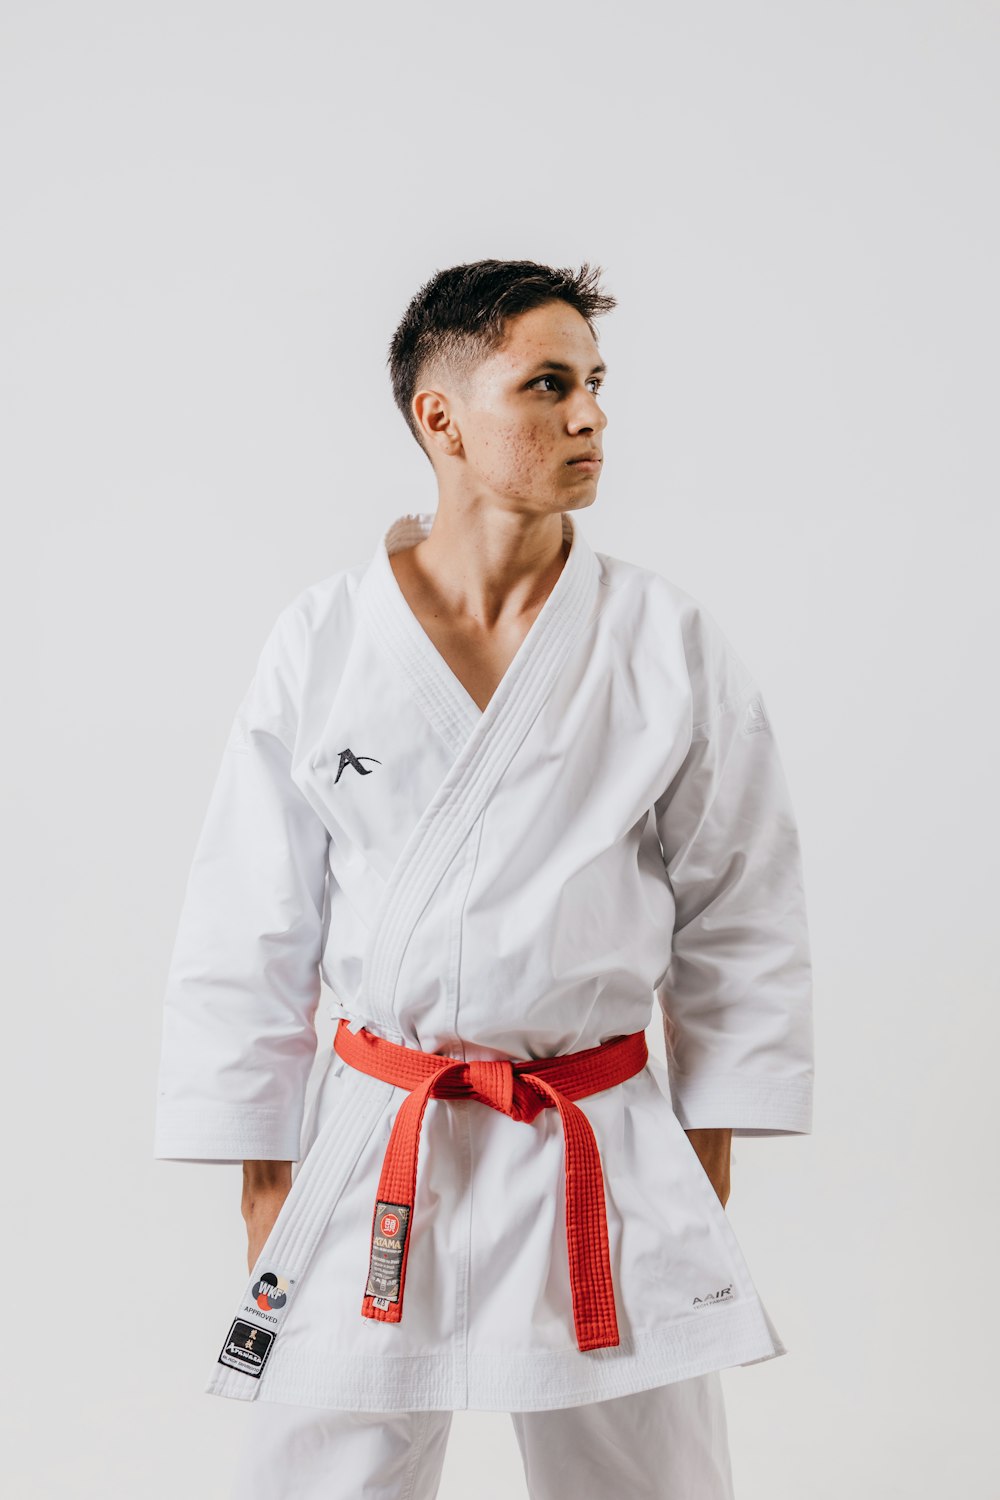 a man wearing a white karate suit and red belt